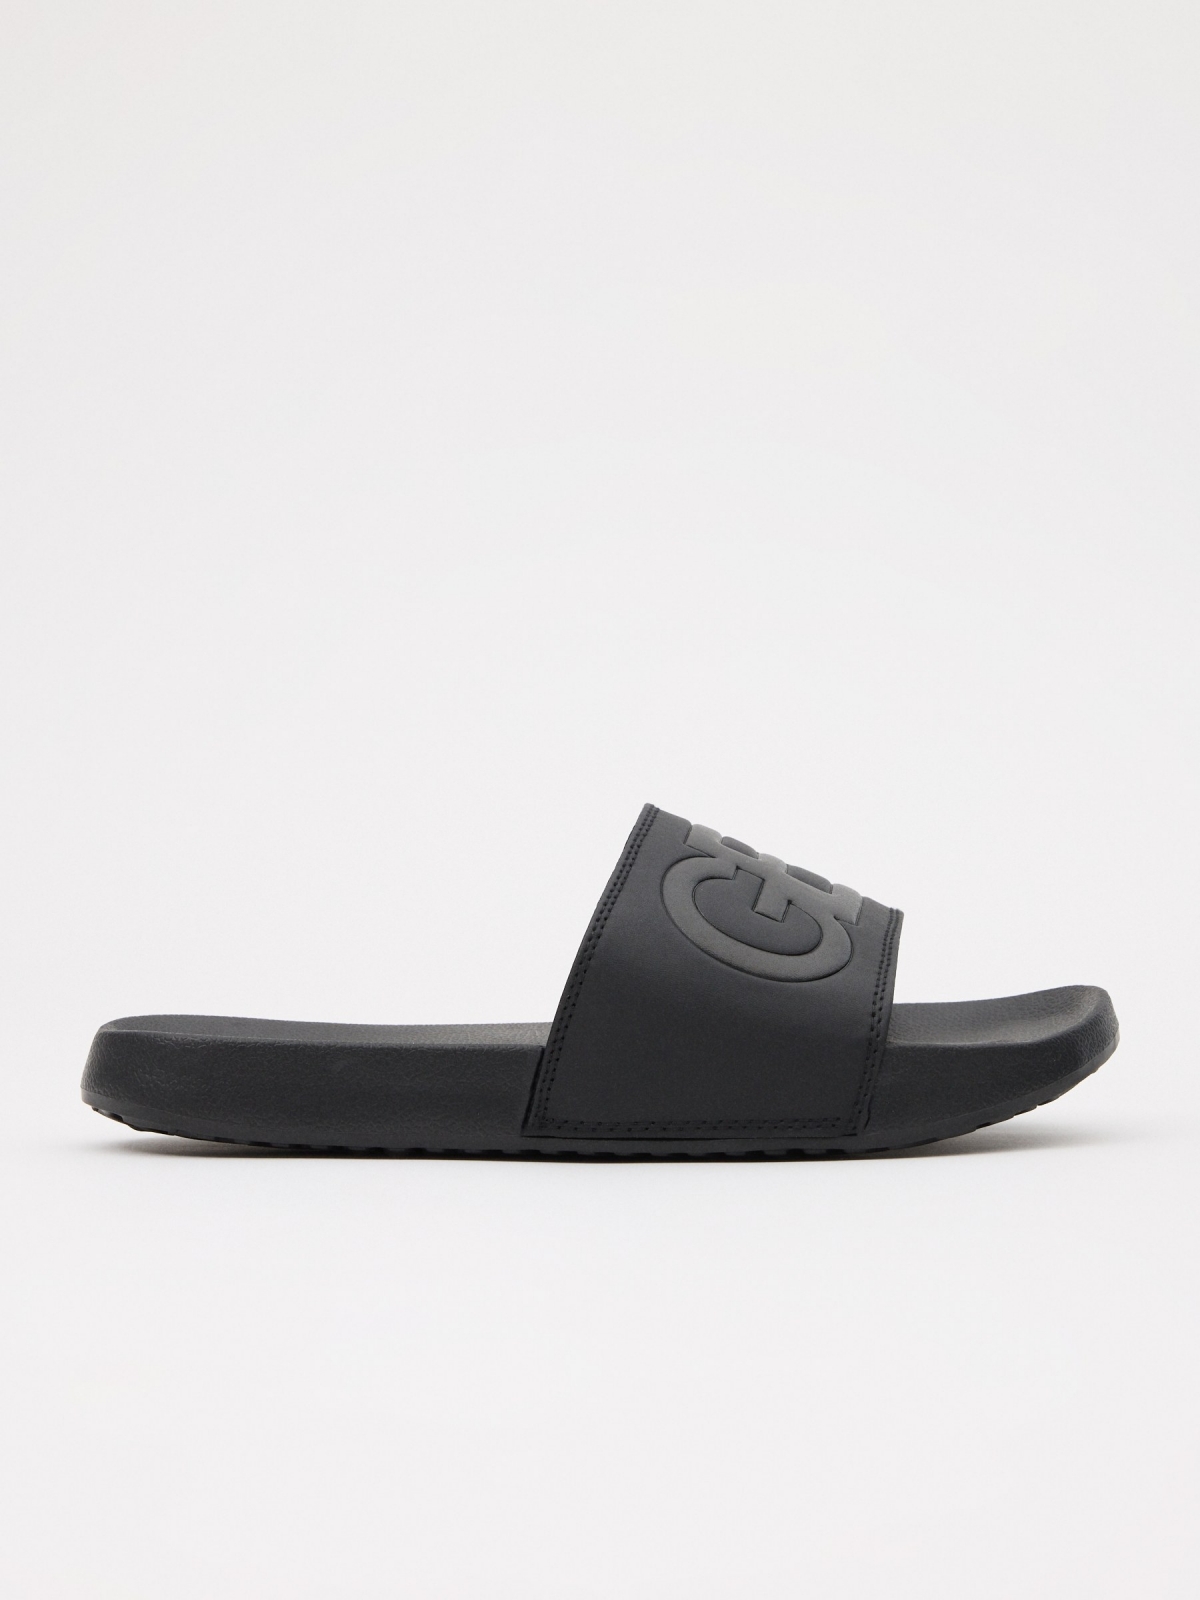 Embossed leather-effect shovel flip-flops lateral view